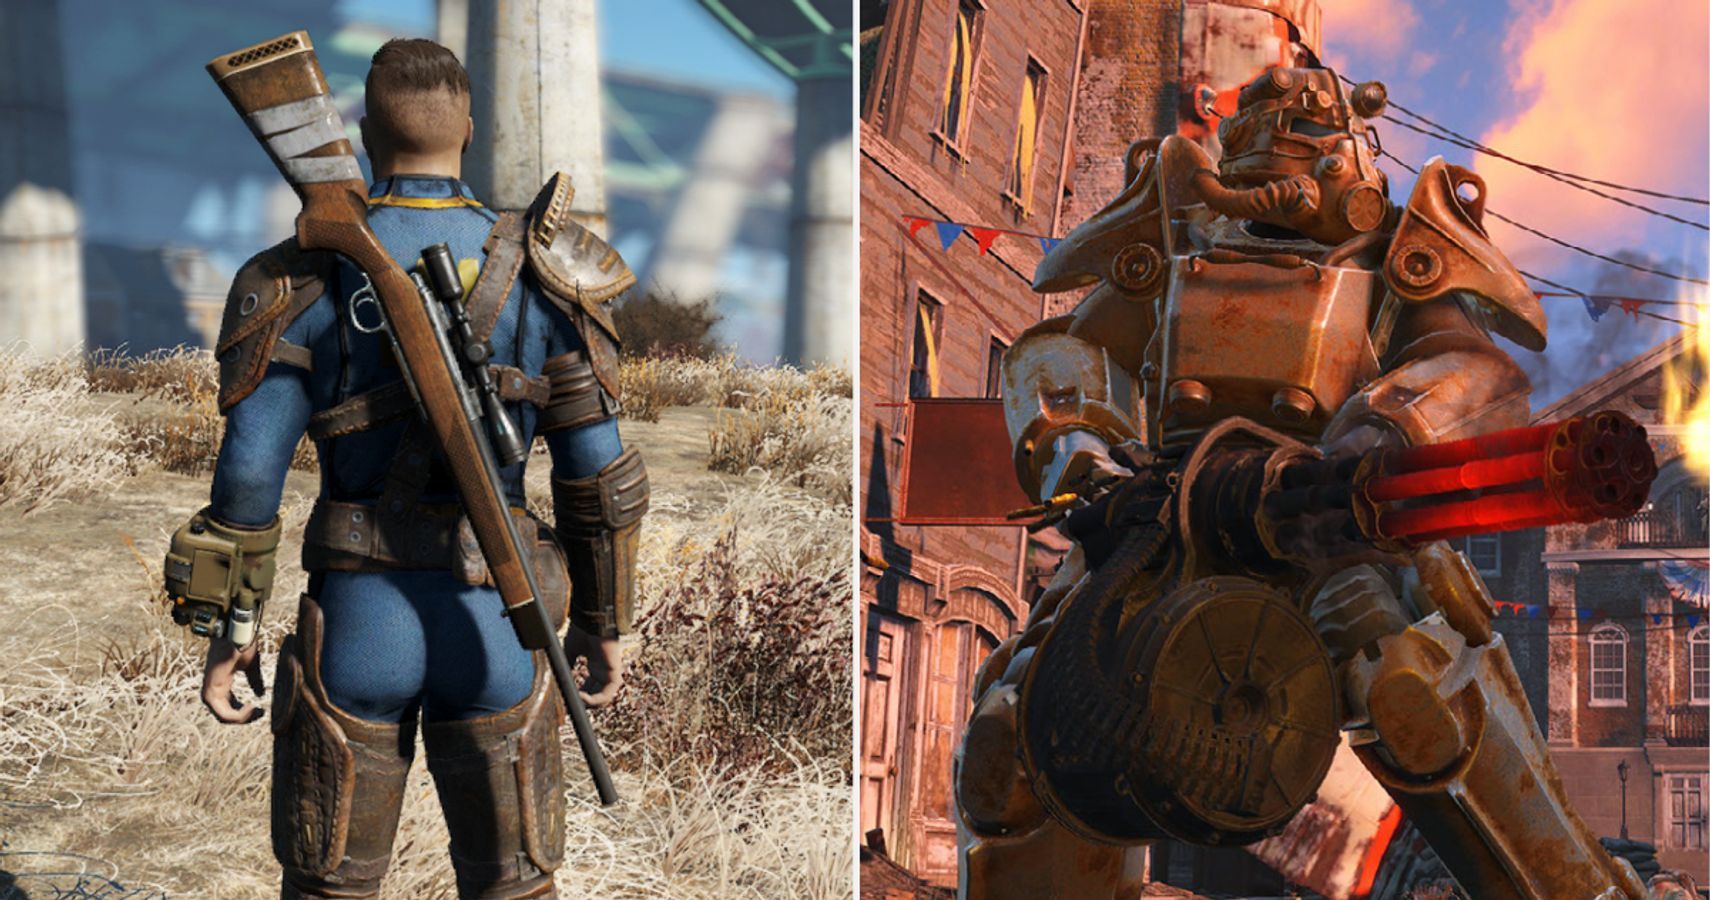 how to lower weapon in fallout 4